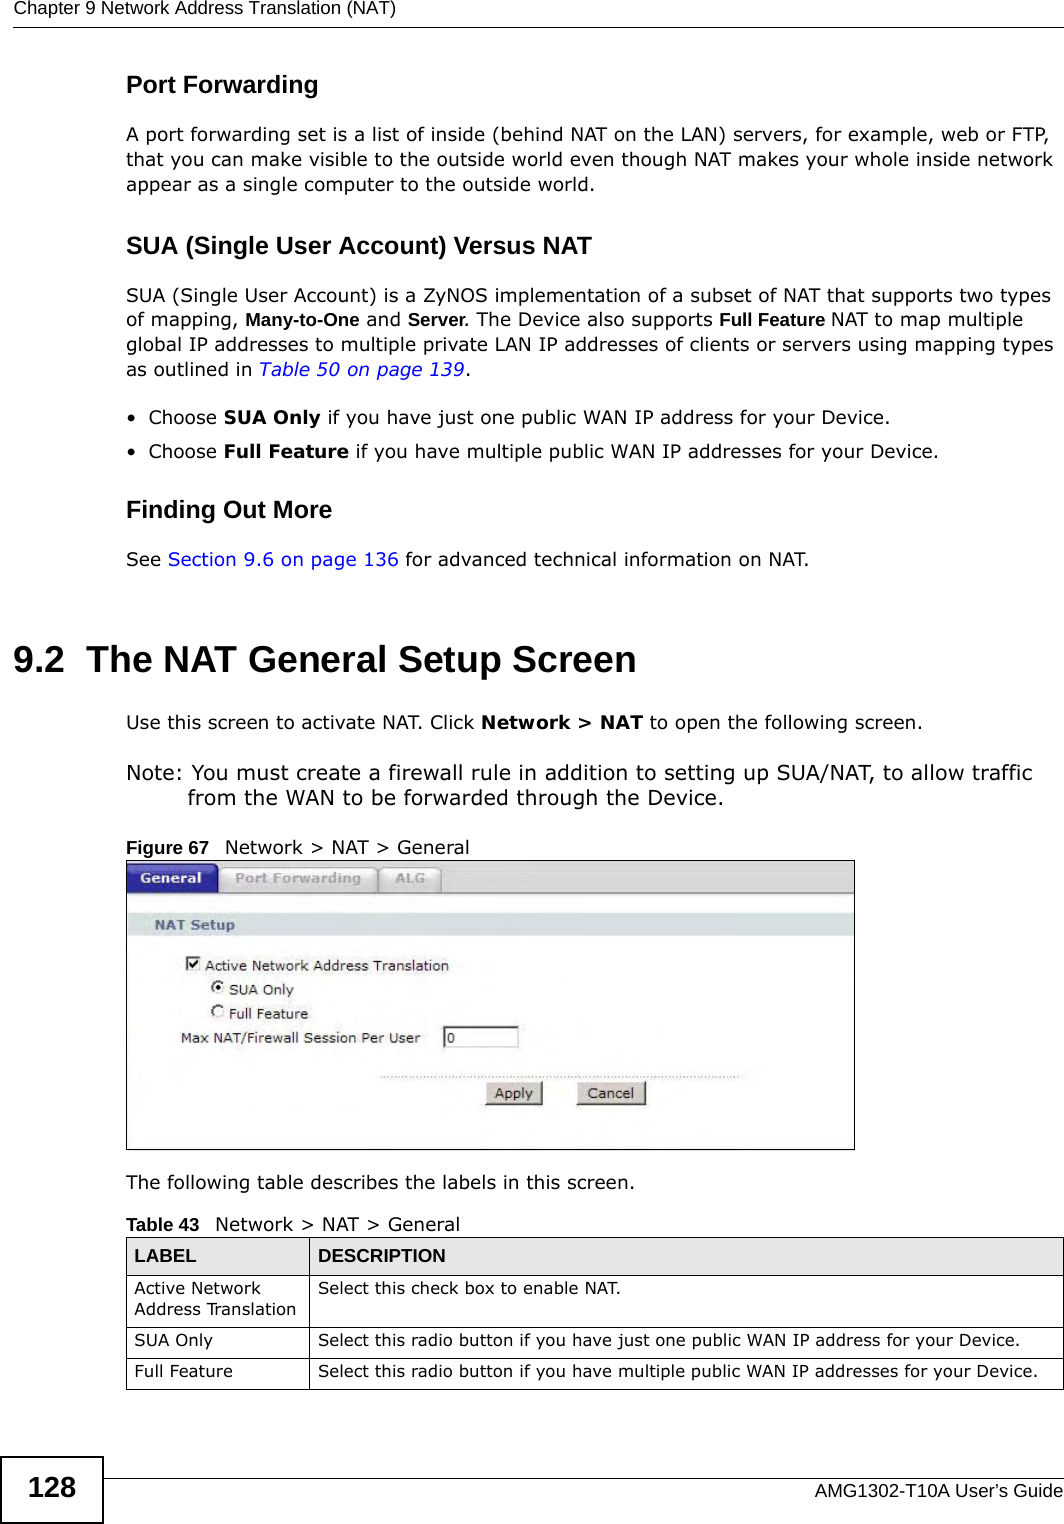 Chapter 9 Network Address Translation (NAT)AMG1302-T10A User’s Guide128Port ForwardingA port forwarding set is a list of inside (behind NAT on the LAN) servers, for example, web or FTP, that you can make visible to the outside world even though NAT makes your whole inside network appear as a single computer to the outside world.SUA (Single User Account) Versus NATSUA (Single User Account) is a ZyNOS implementation of a subset of NAT that supports two types of mapping, Many-to-One and Server. The Device also supports Full Feature NAT to map multiple global IP addresses to multiple private LAN IP addresses of clients or servers using mapping types as outlined in Table 50 on page 139. • Choose SUA Only if you have just one public WAN IP address for your Device.• Choose Full Feature if you have multiple public WAN IP addresses for your Device.Finding Out MoreSee Section 9.6 on page 136 for advanced technical information on NAT.9.2  The NAT General Setup ScreenUse this screen to activate NAT. Click Network &gt; NAT to open the following screen.Note: You must create a firewall rule in addition to setting up SUA/NAT, to allow traffic from the WAN to be forwarded through the Device.Figure 67   Network &gt; NAT &gt; GeneralThe following table describes the labels in this screen.Table 43   Network &gt; NAT &gt; GeneralLABEL DESCRIPTIONActive Network Address Translation Select this check box to enable NAT.SUA Only Select this radio button if you have just one public WAN IP address for your Device.Full Feature  Select this radio button if you have multiple public WAN IP addresses for your Device.